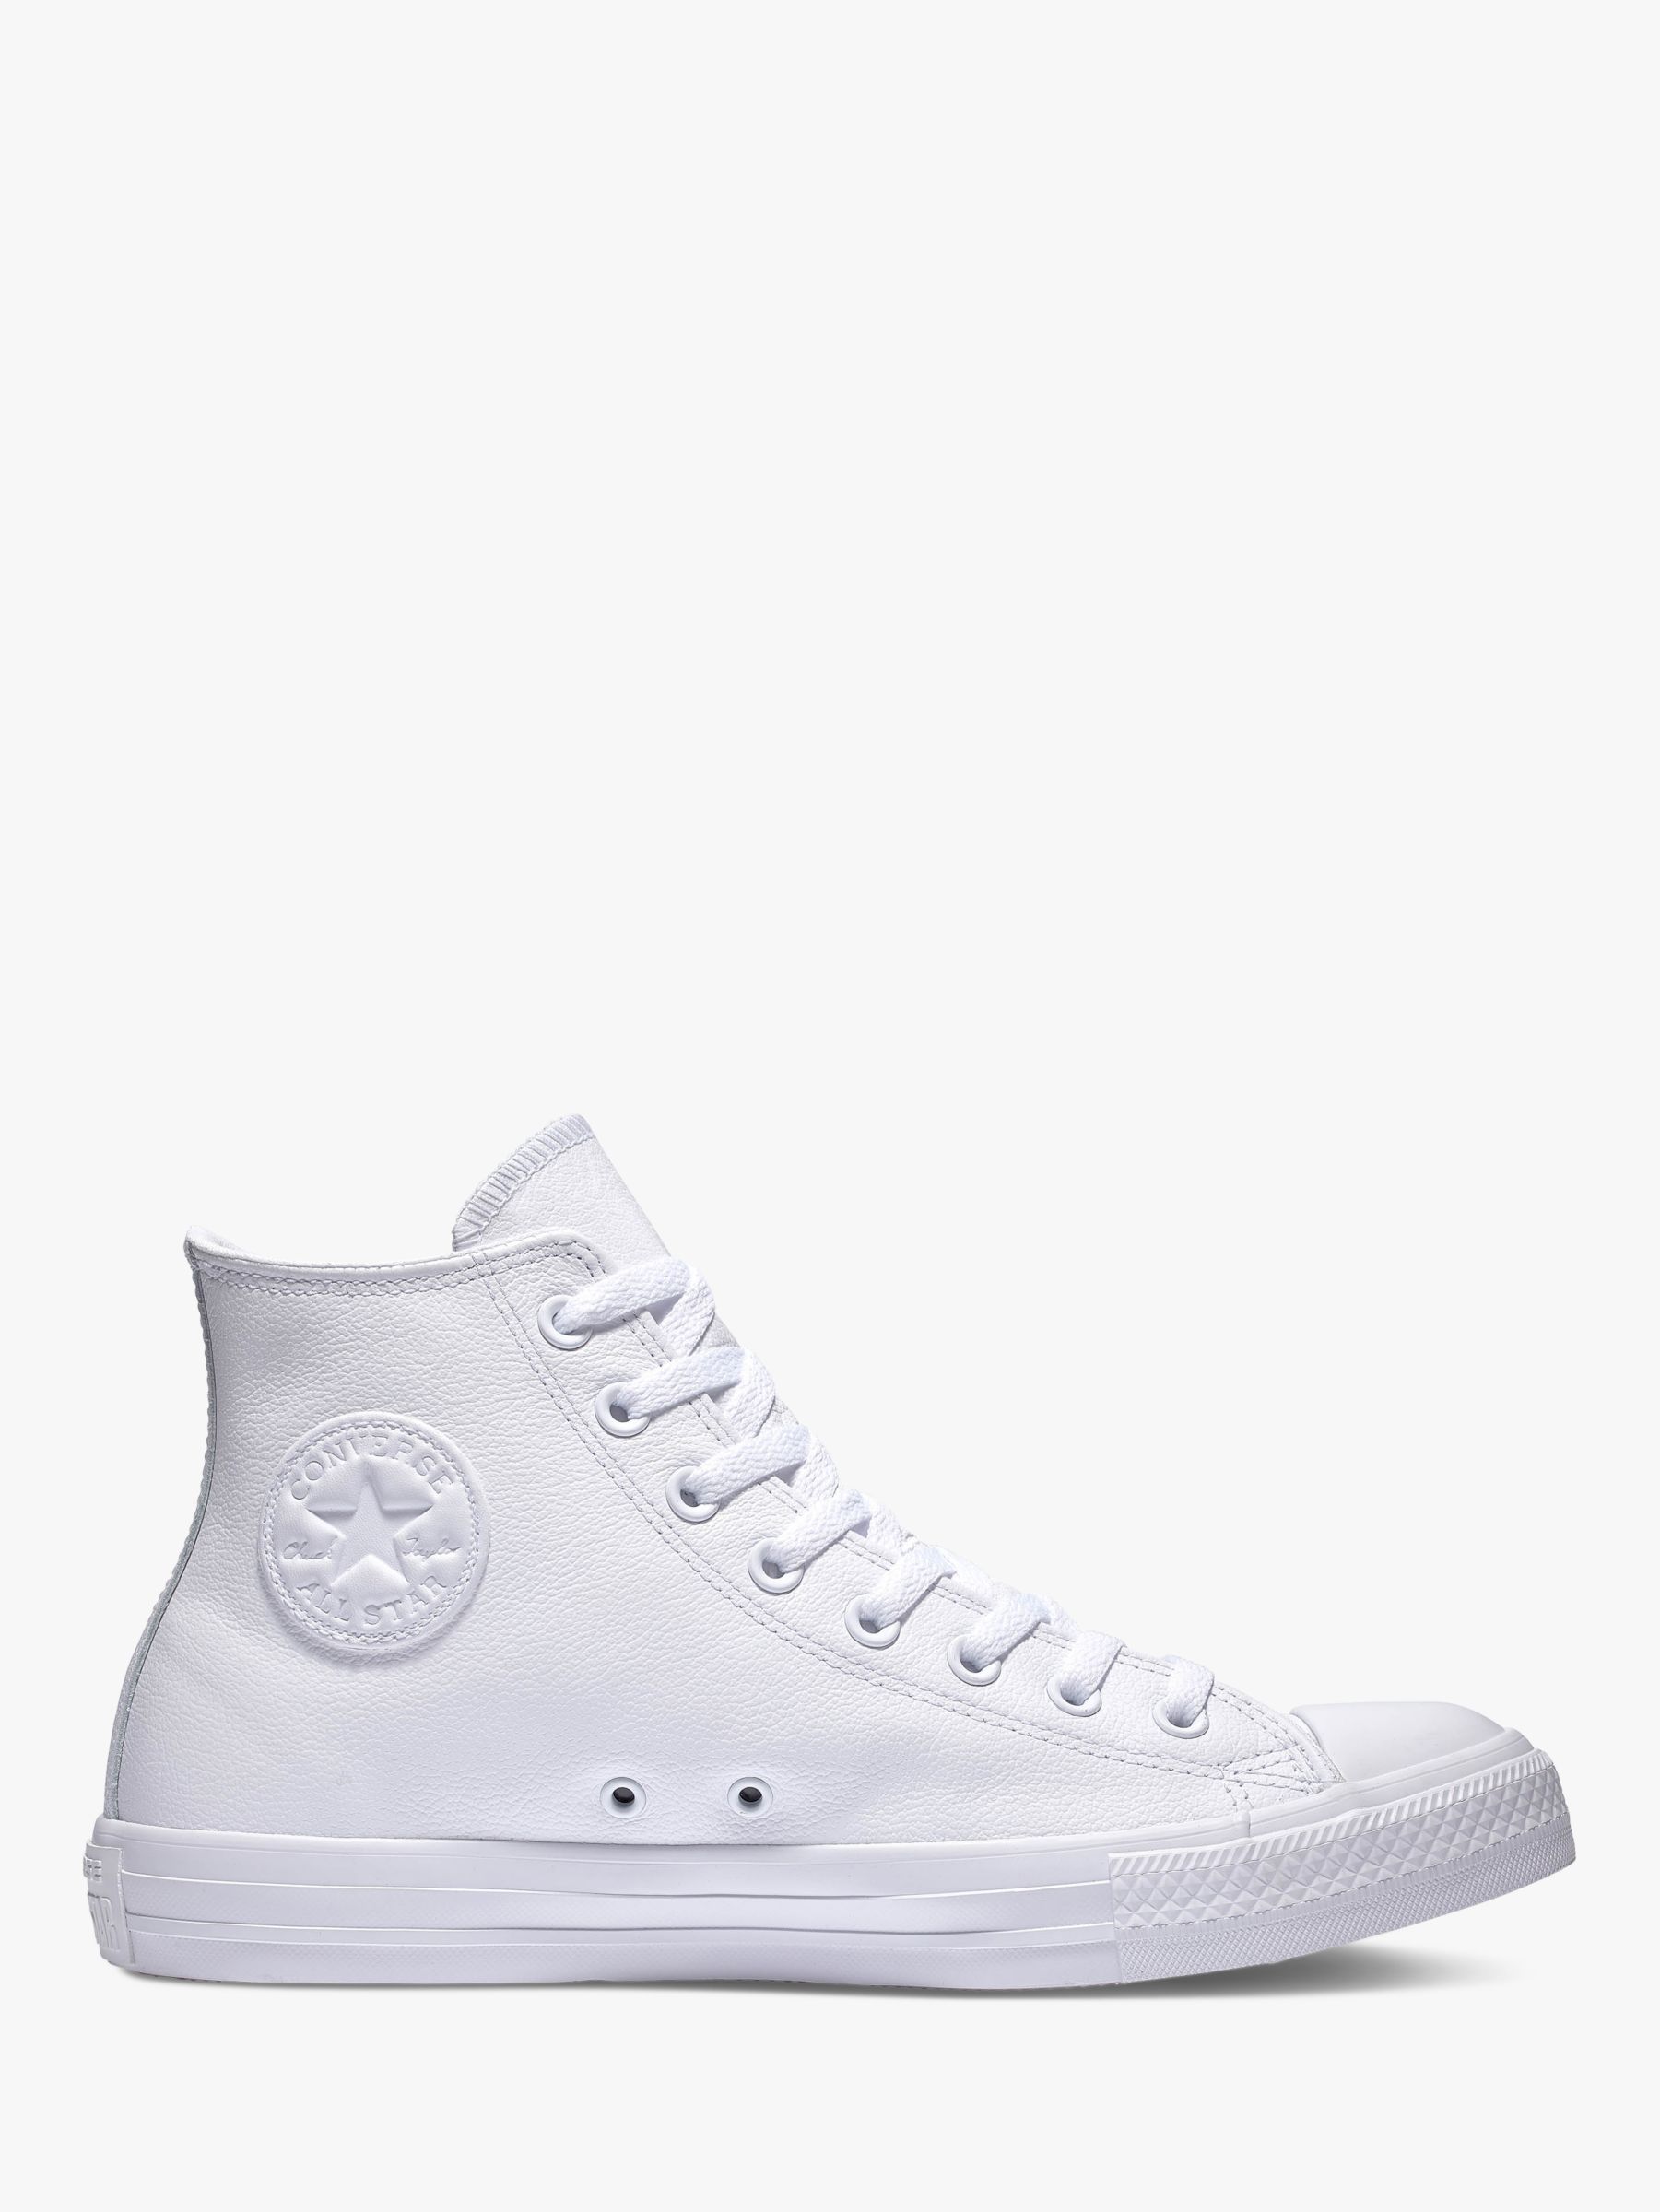 converse leather high tops uk 